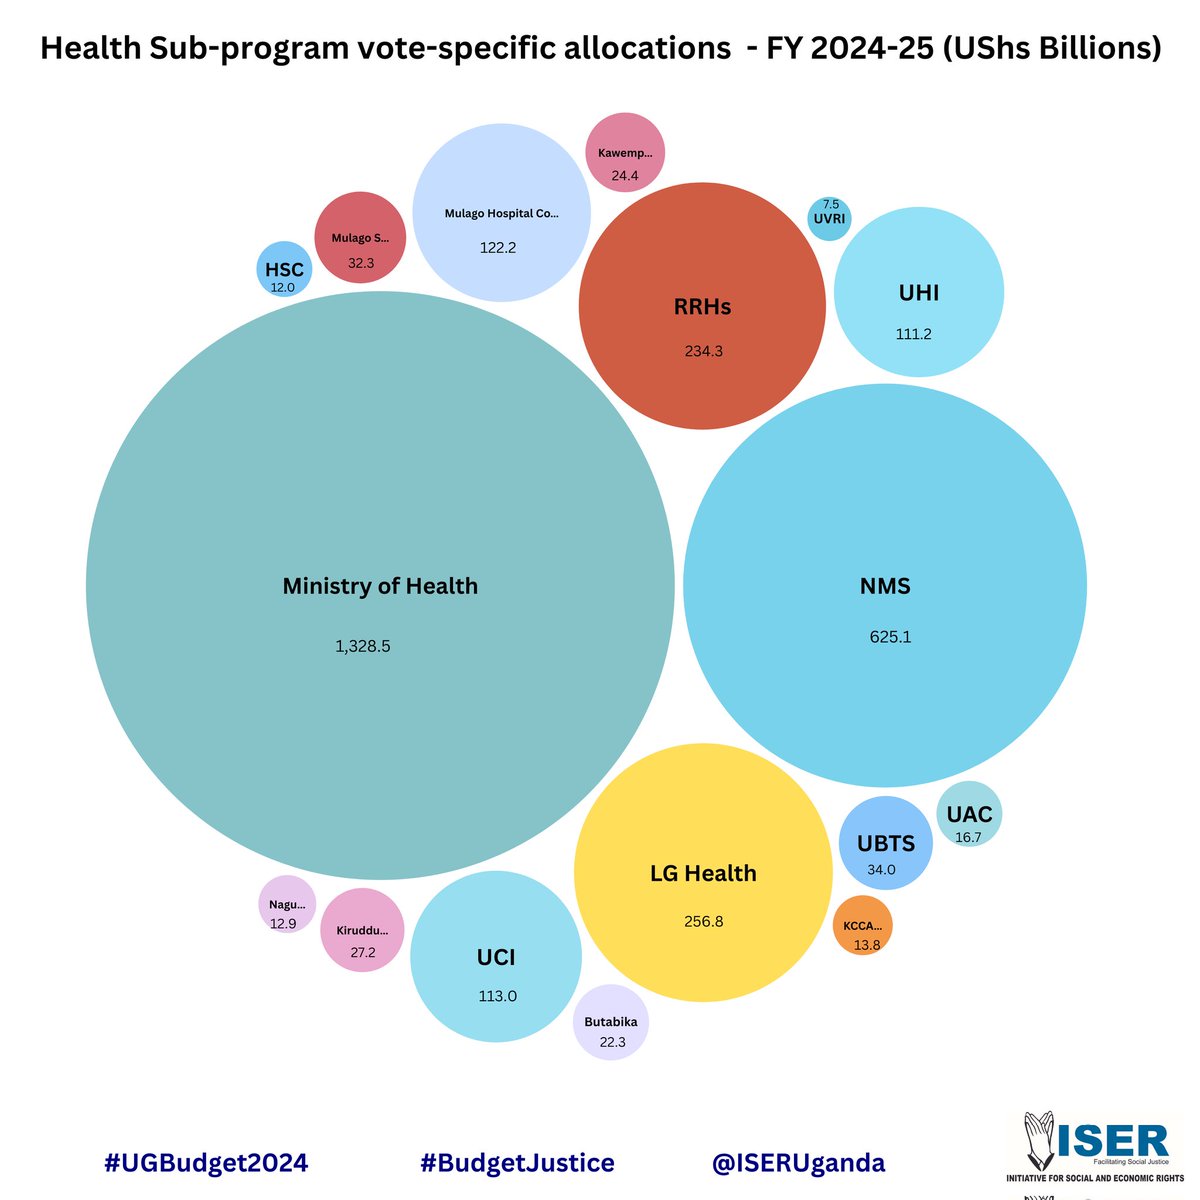 Uganda's FY 2024-25 health budget allocates the majority of funds to the @MinofHealthUG itself (UGX1.3 trillion), with much smaller allocations to individual hospitals & other programs in the health sector. This is NOT an equitable way of distributing health resources.